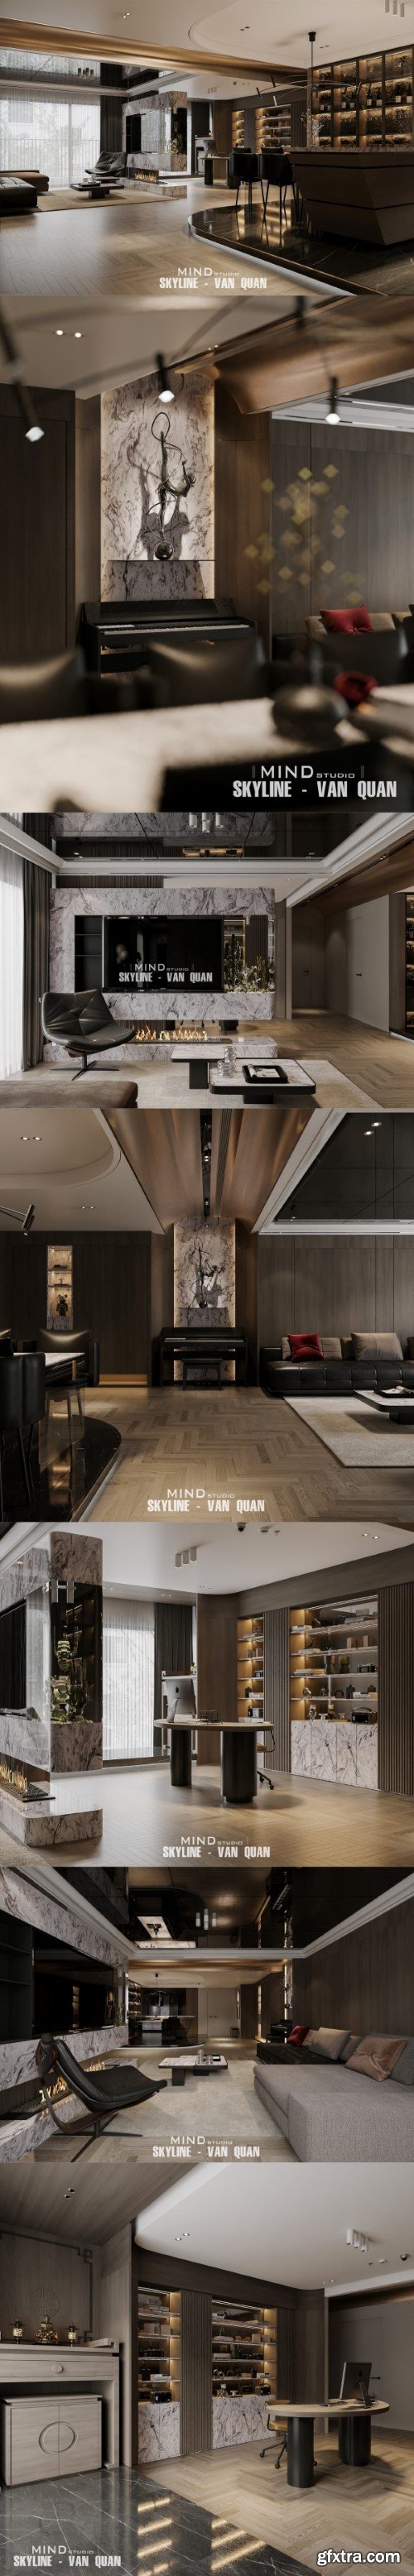 Living Room – Kitchen Interior by Trung Nghia